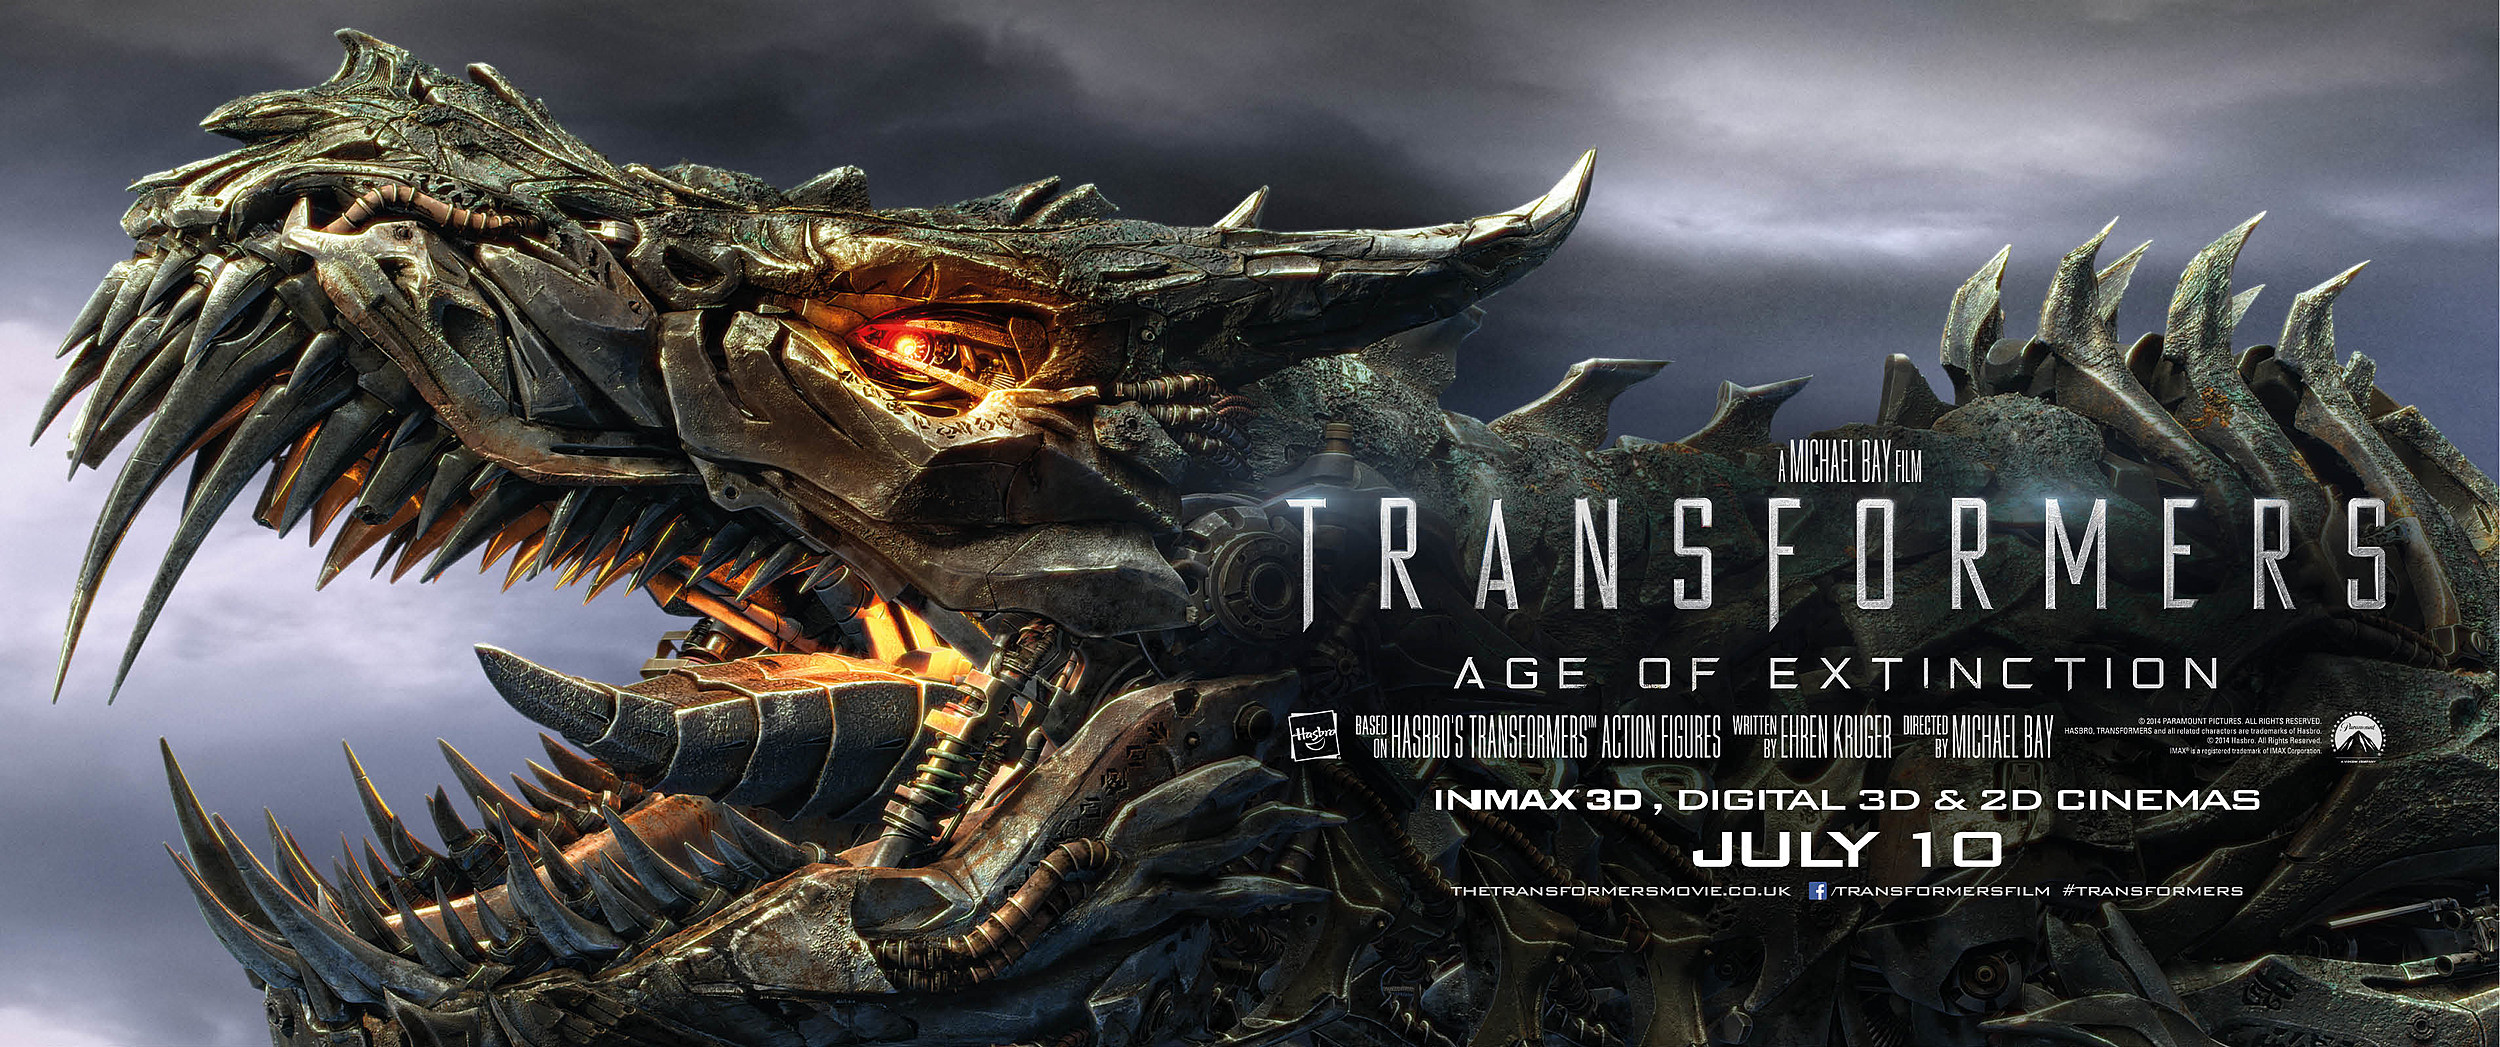 Watch Transformers 4 Age of Extinction Online Free Full Movie